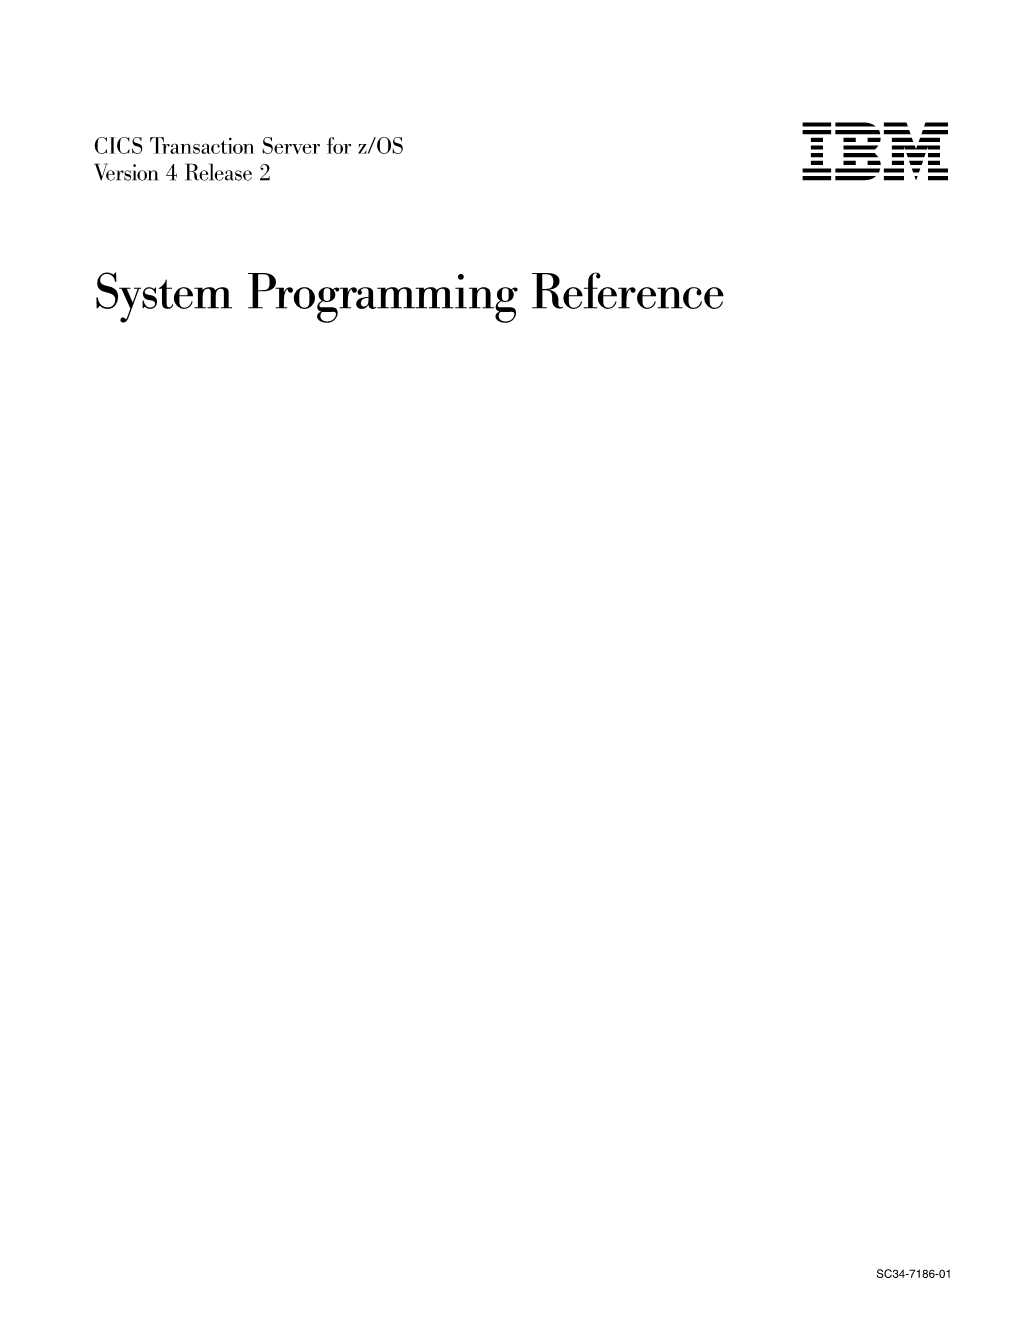 CICS TS for Z/OS 4.2: System Programming Reference INQUIRE TRANCLASS